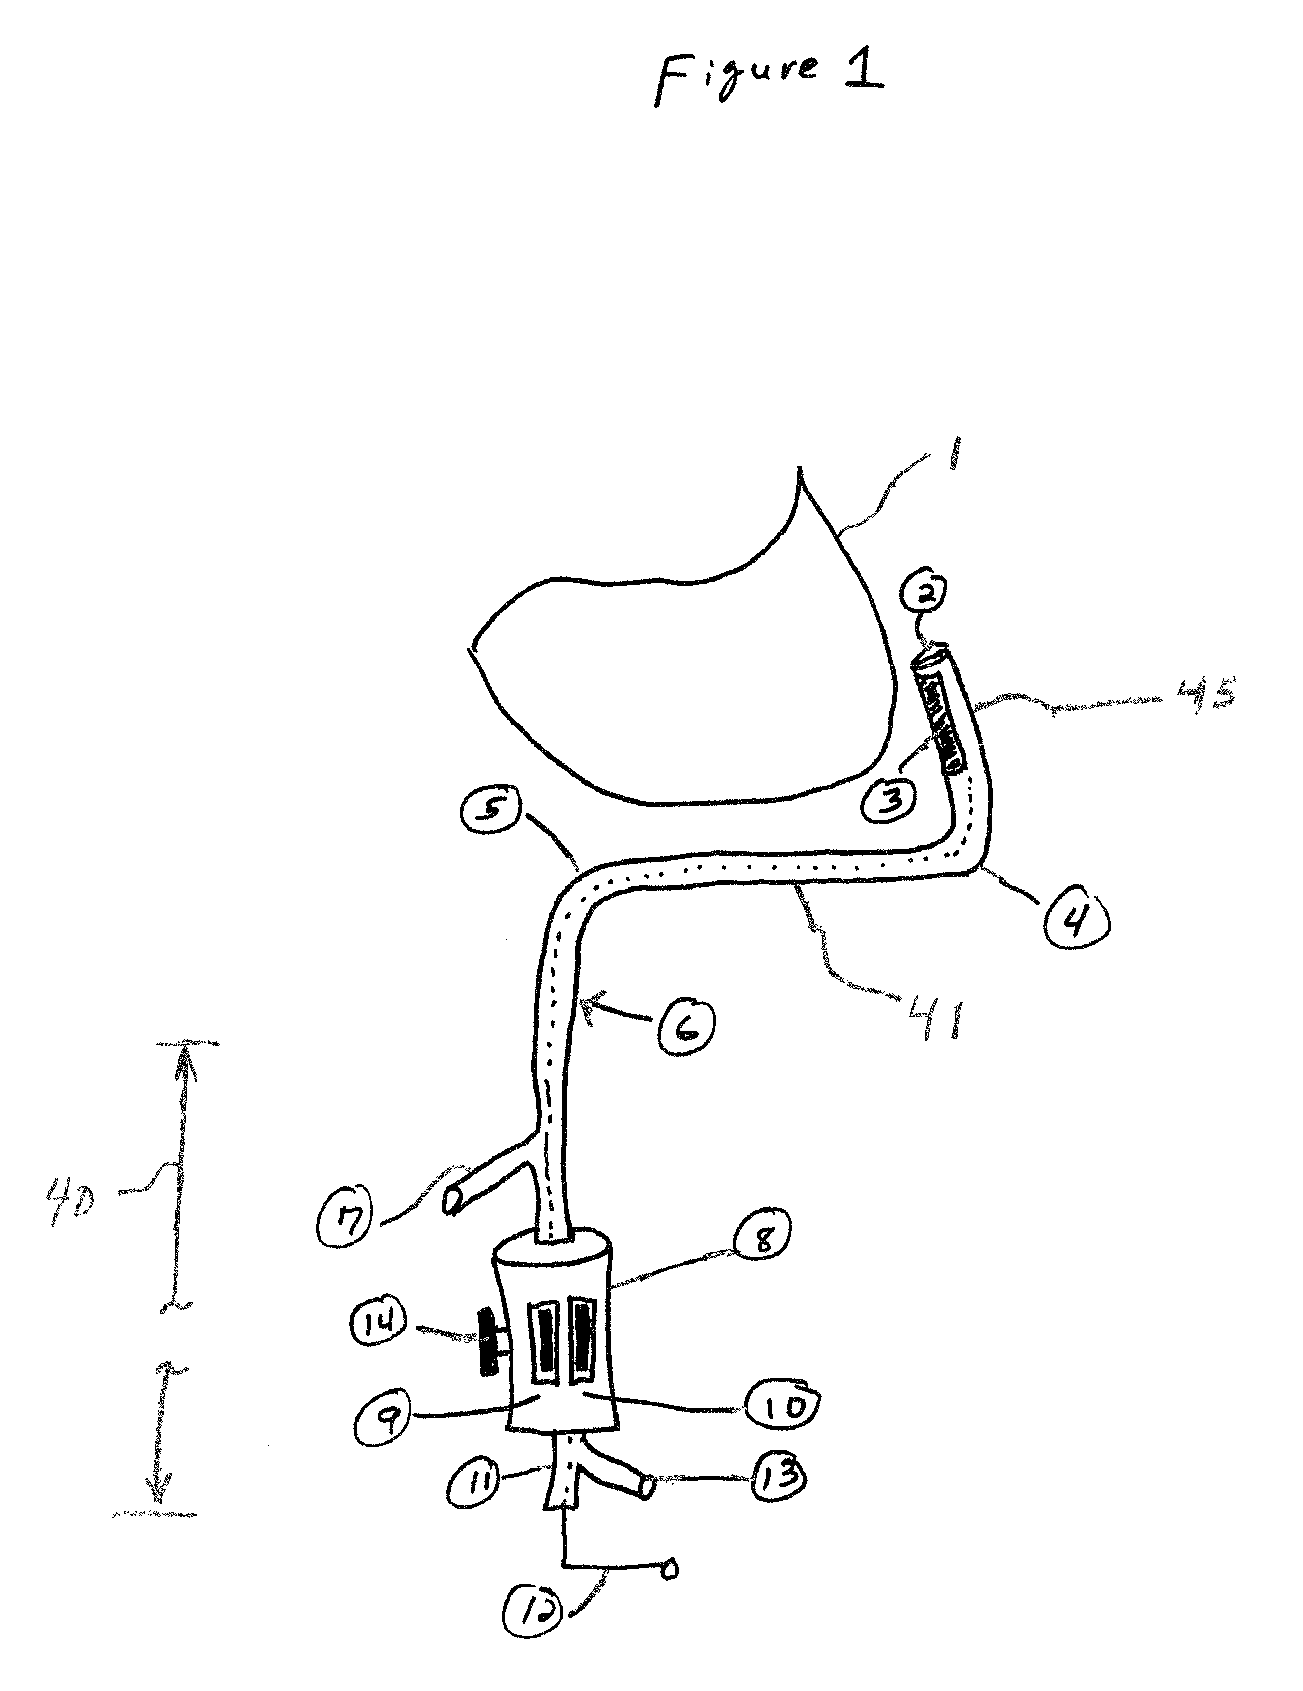 Electrode catheter for ablation purposes and related method thereof